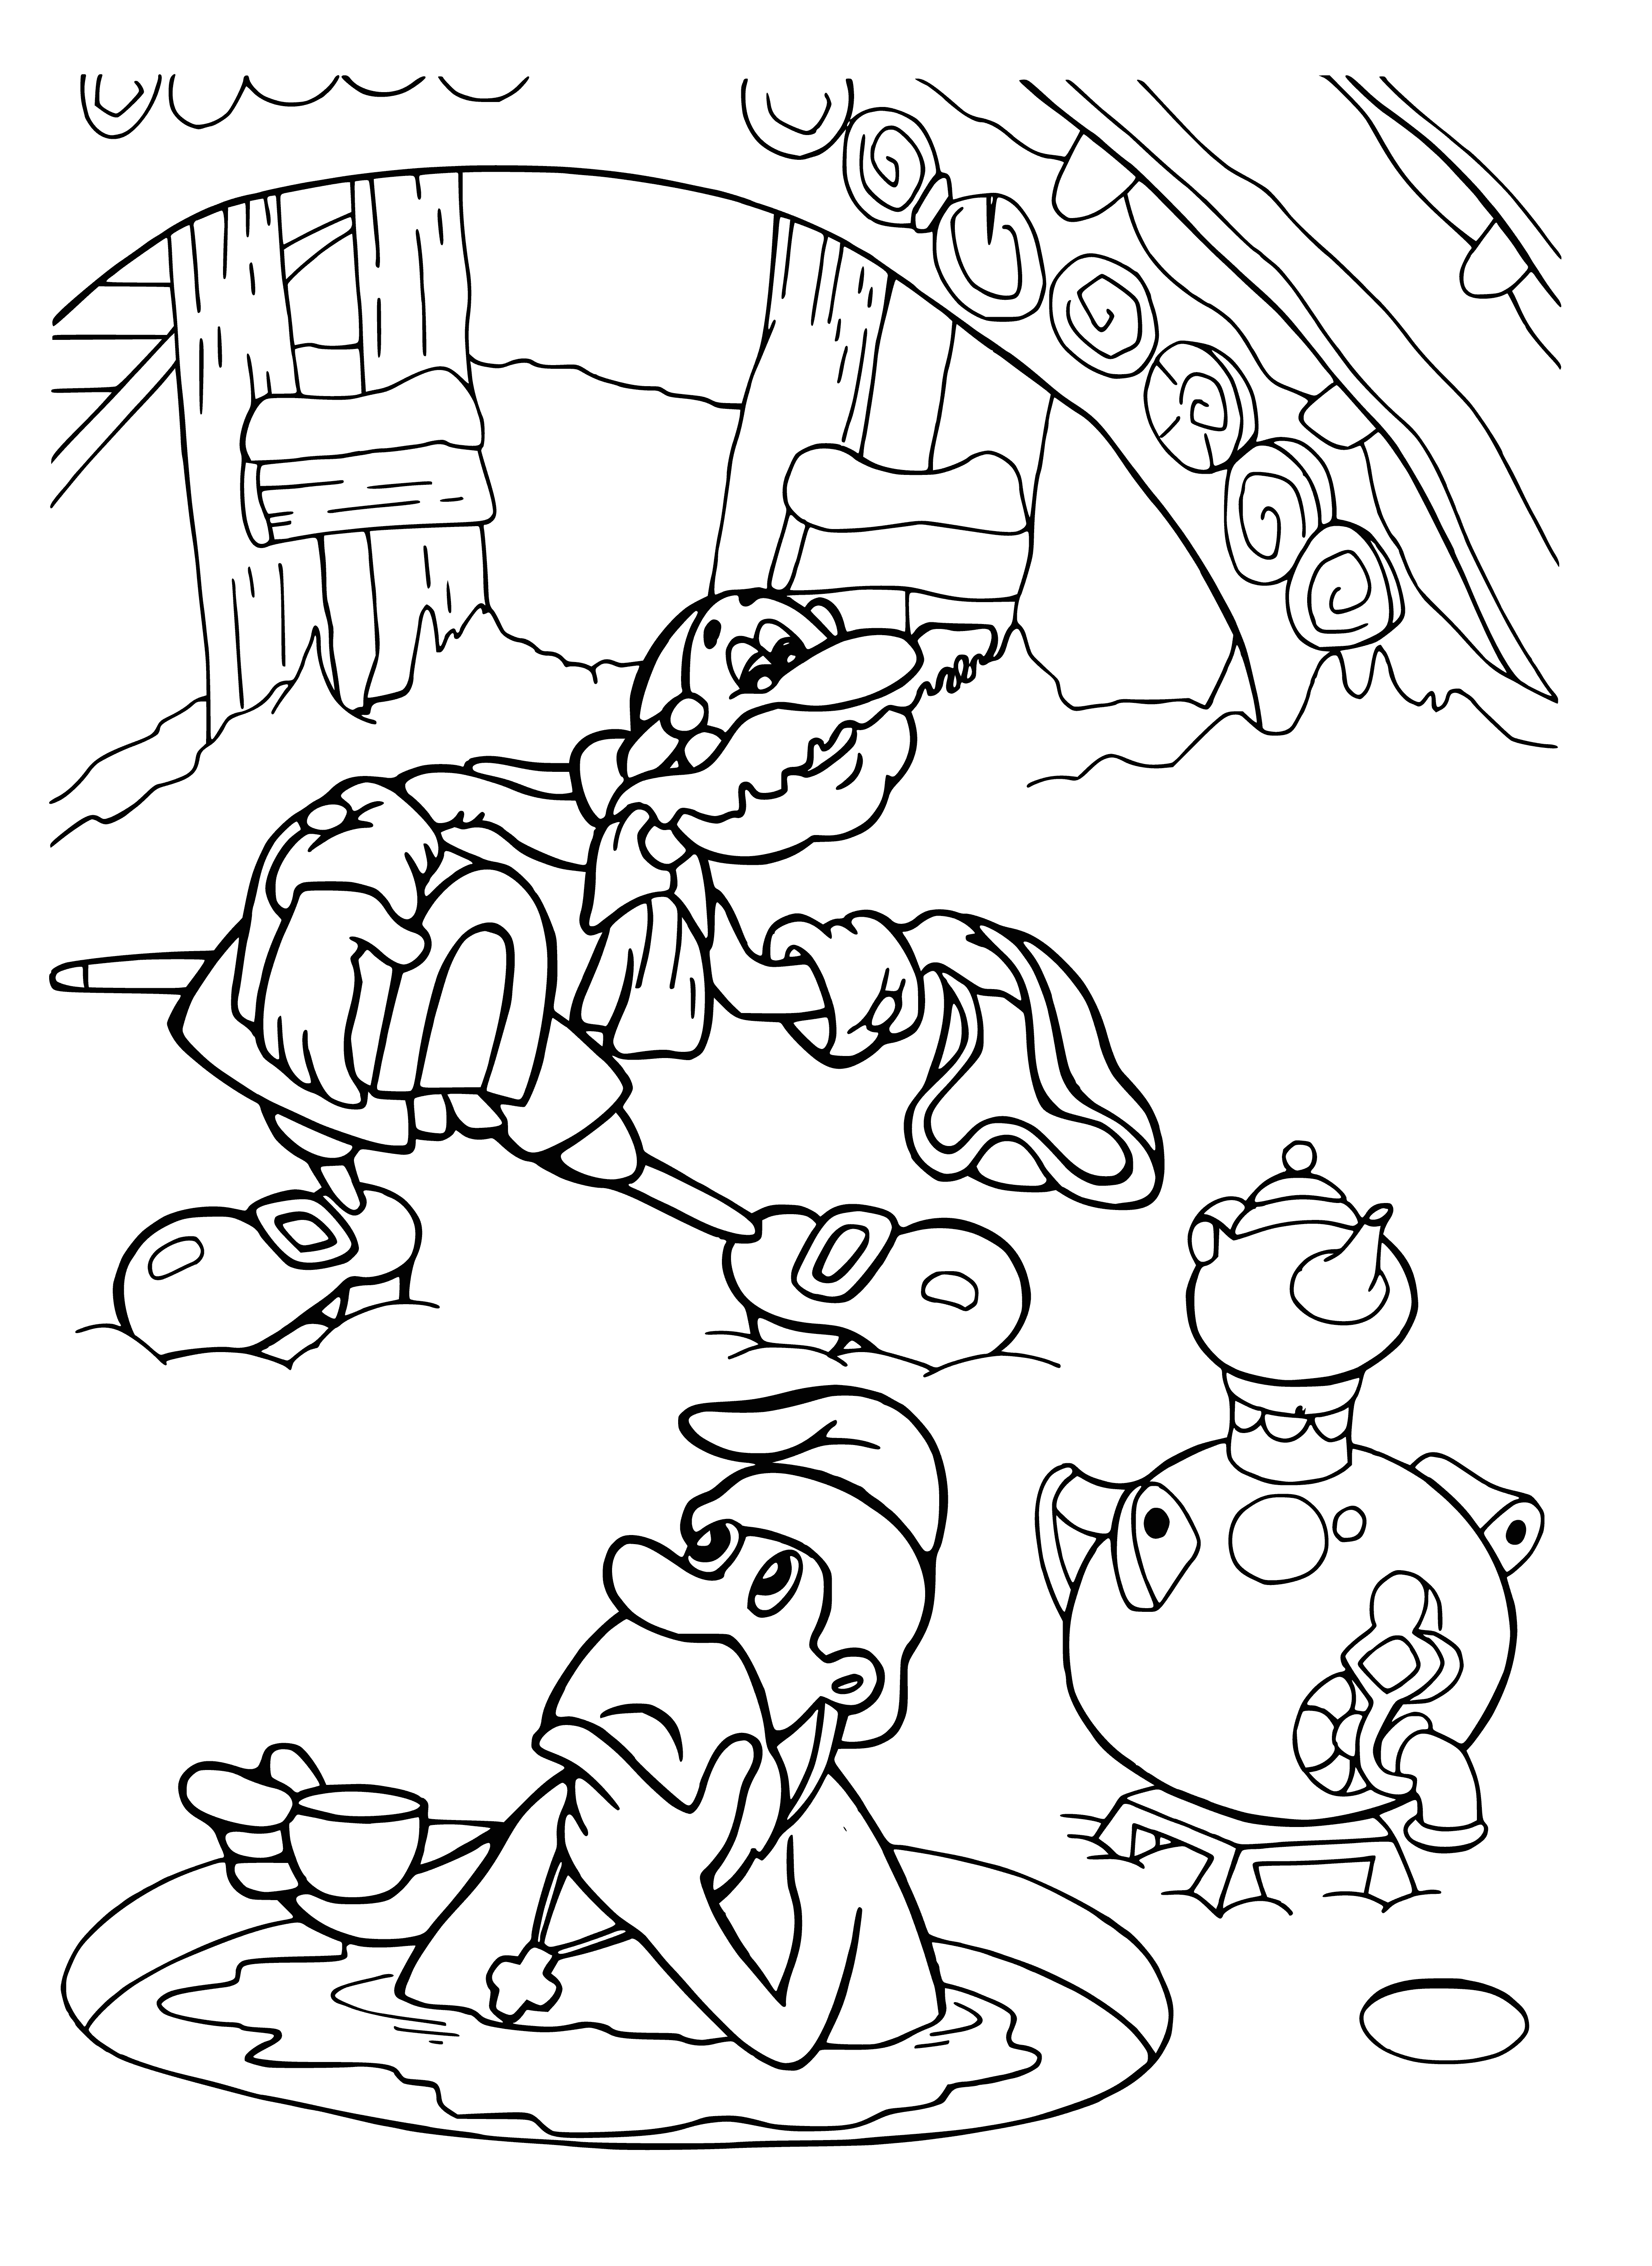 coloring page: Friedrich Gundolf is writing "The Adventures of Munchausen" surrounded by several smaller books and papers. #writing #adventure